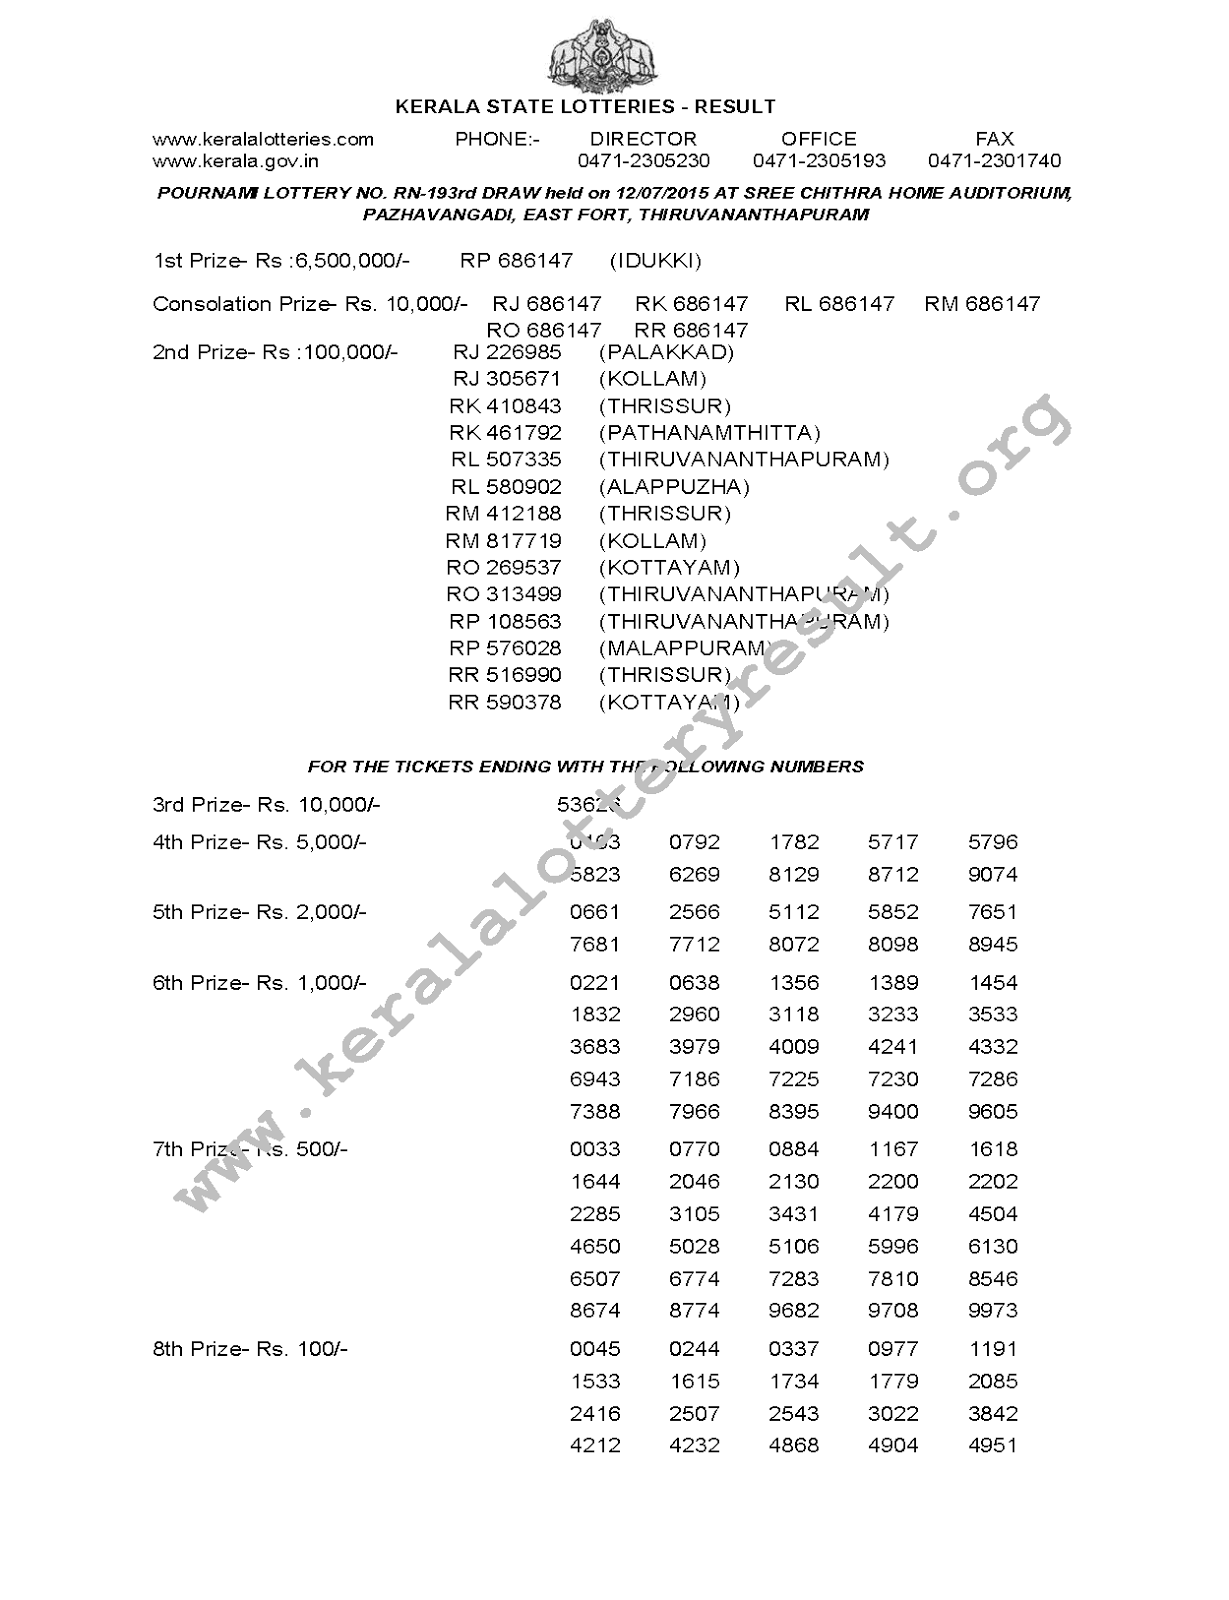 POURNAMI Lottery RN 193 Result 12-7-2015